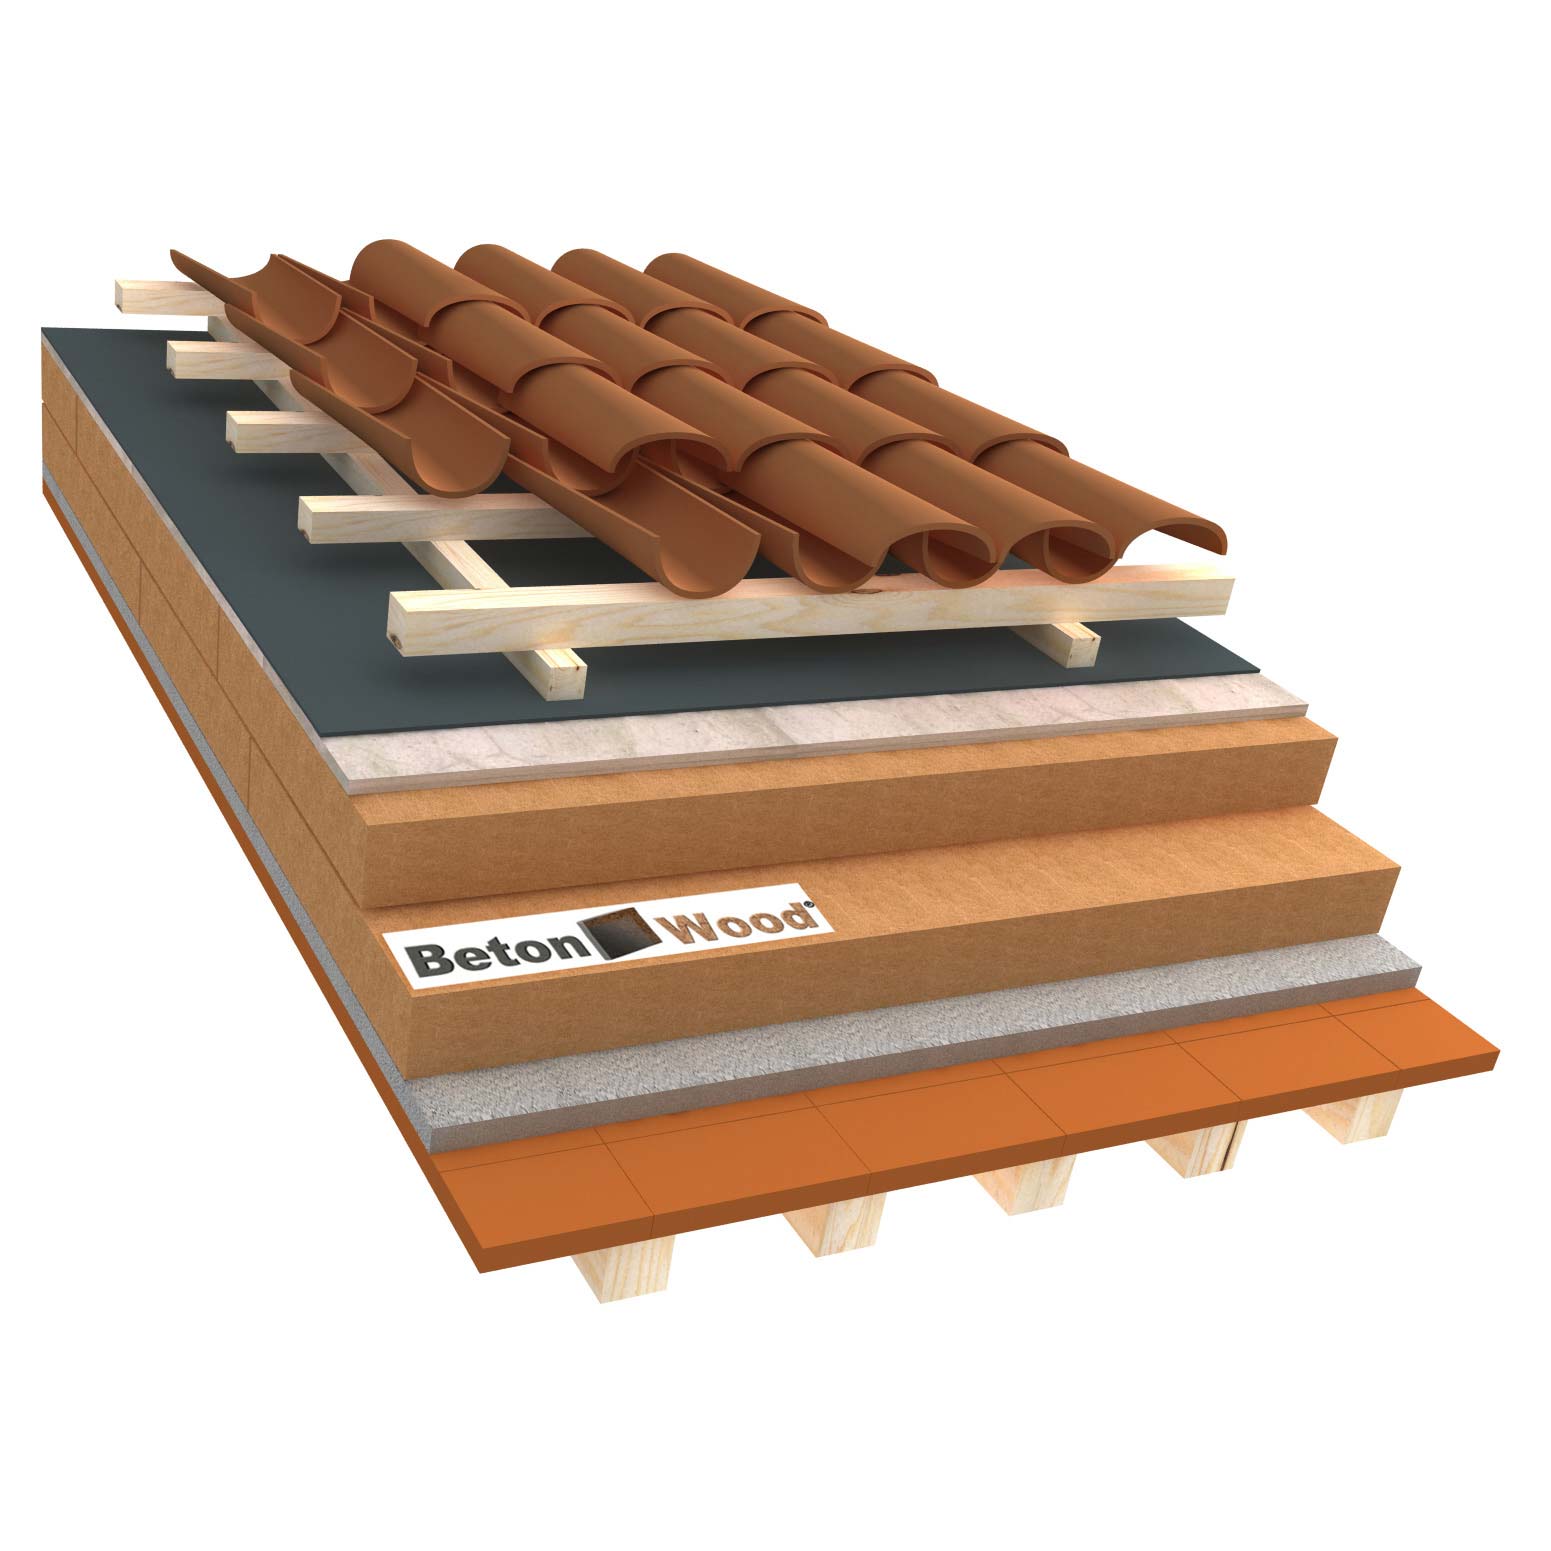 Ventilated roof with fiber wood Therm and cement bonded particle boards on terracotta tiles